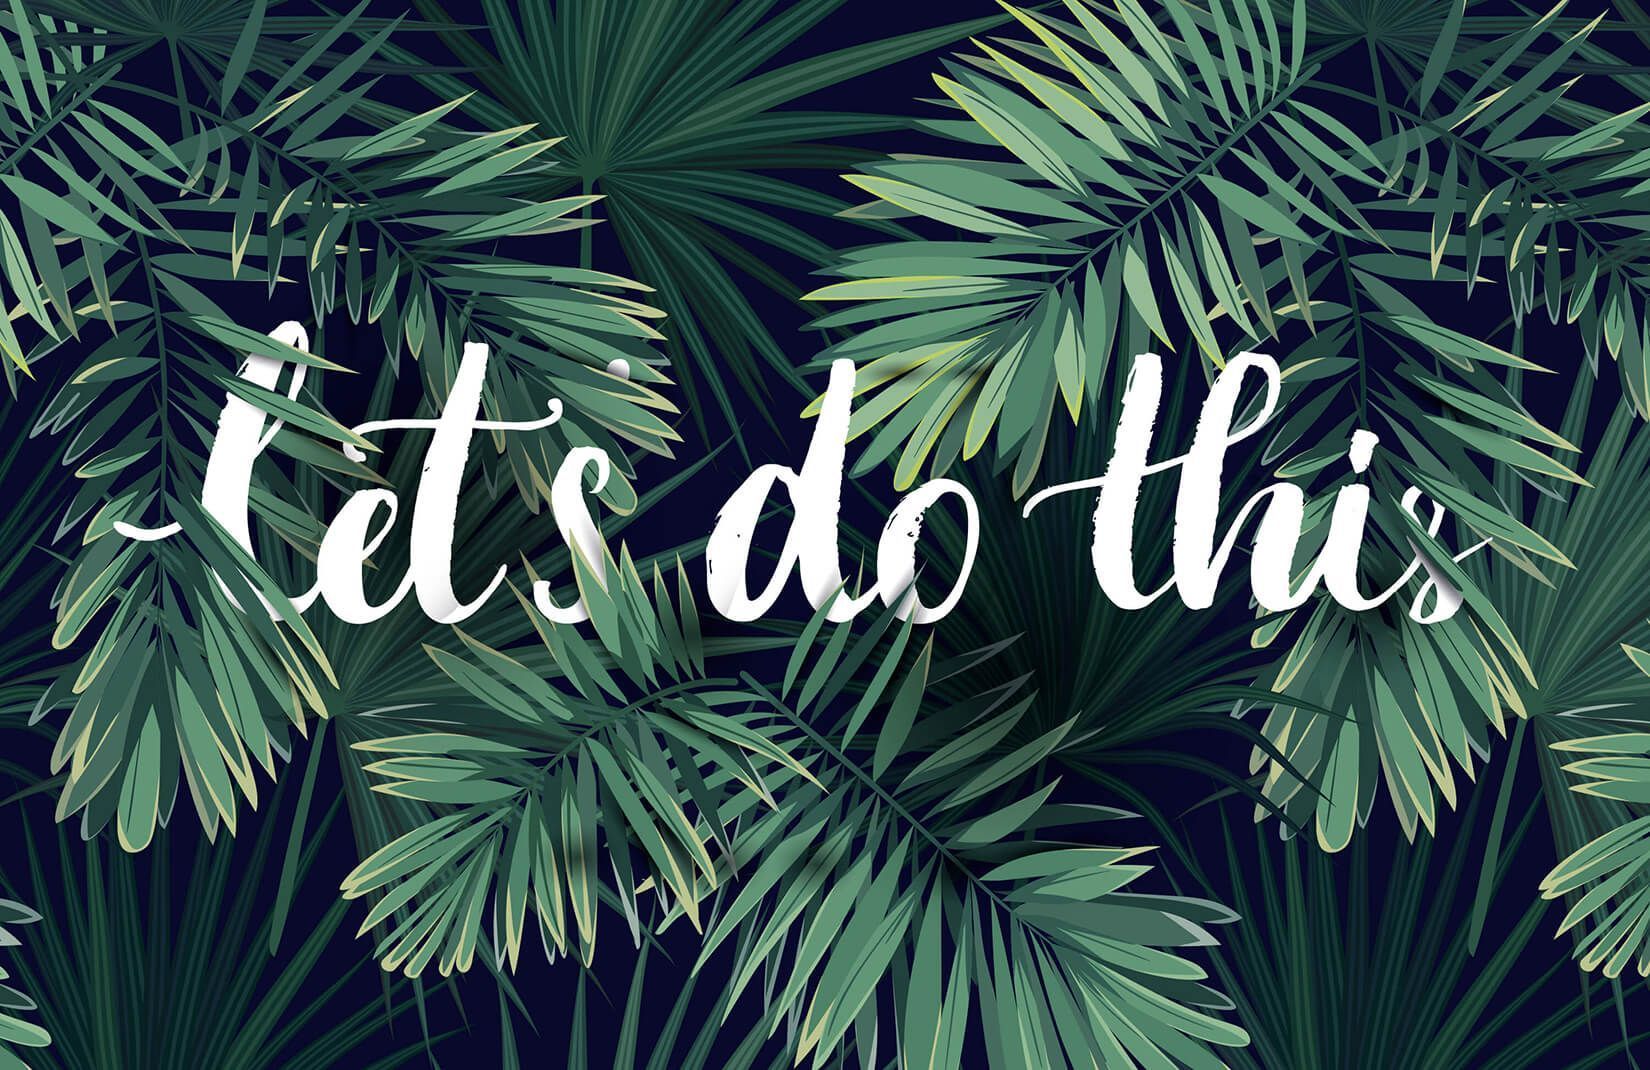 Let's do this with palm leaves - Tropical